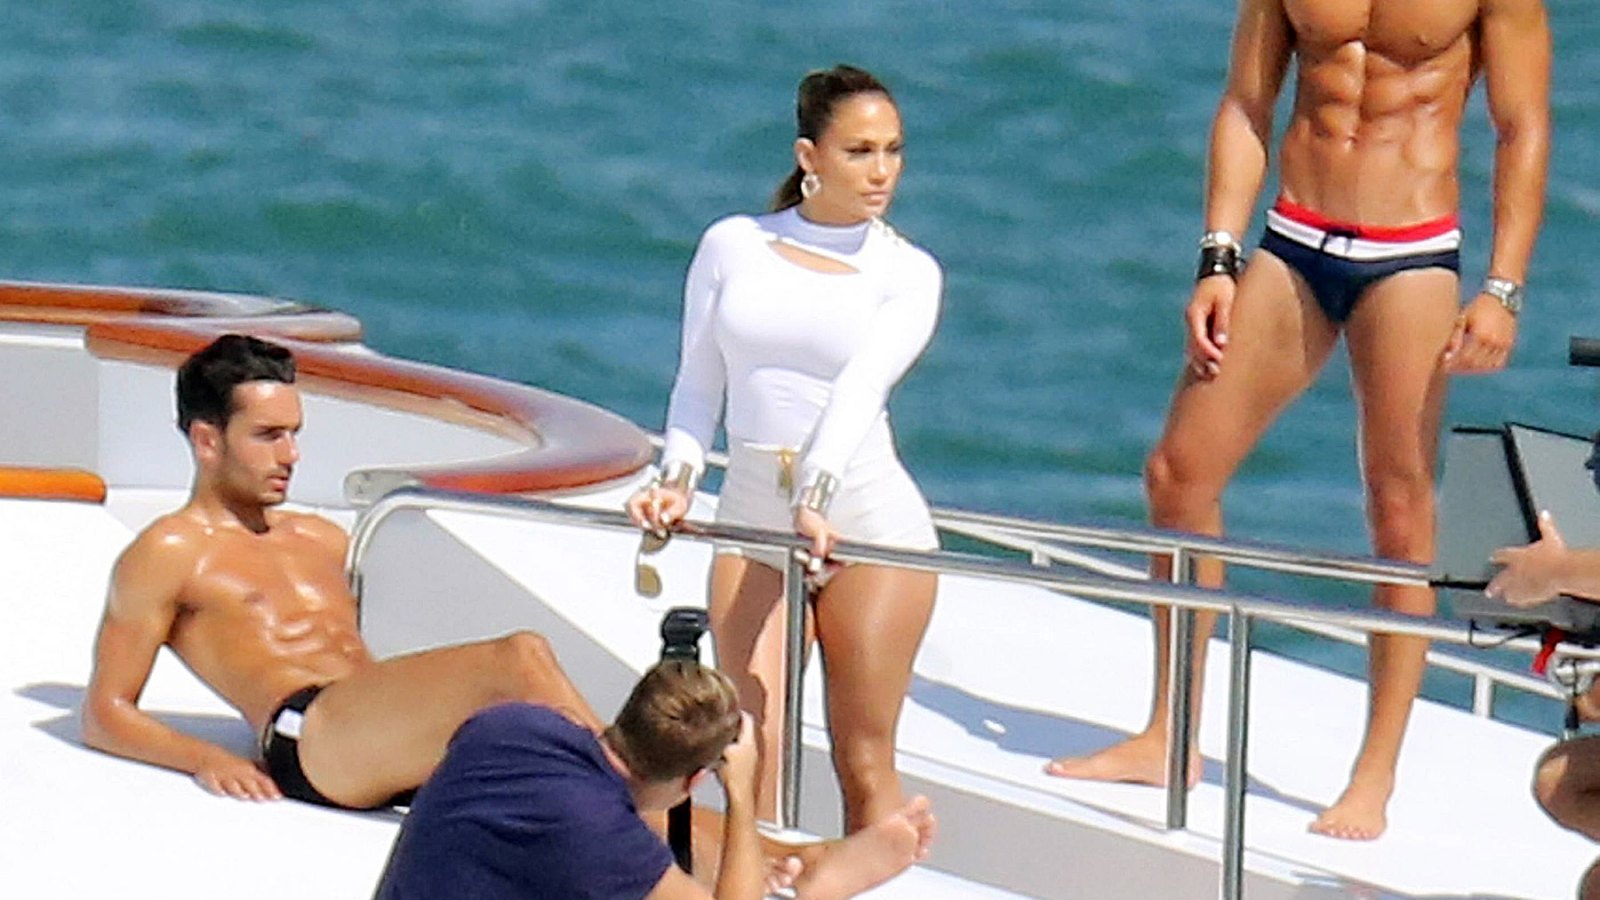 Jennifer Lopez films the We Are One World Cup music video